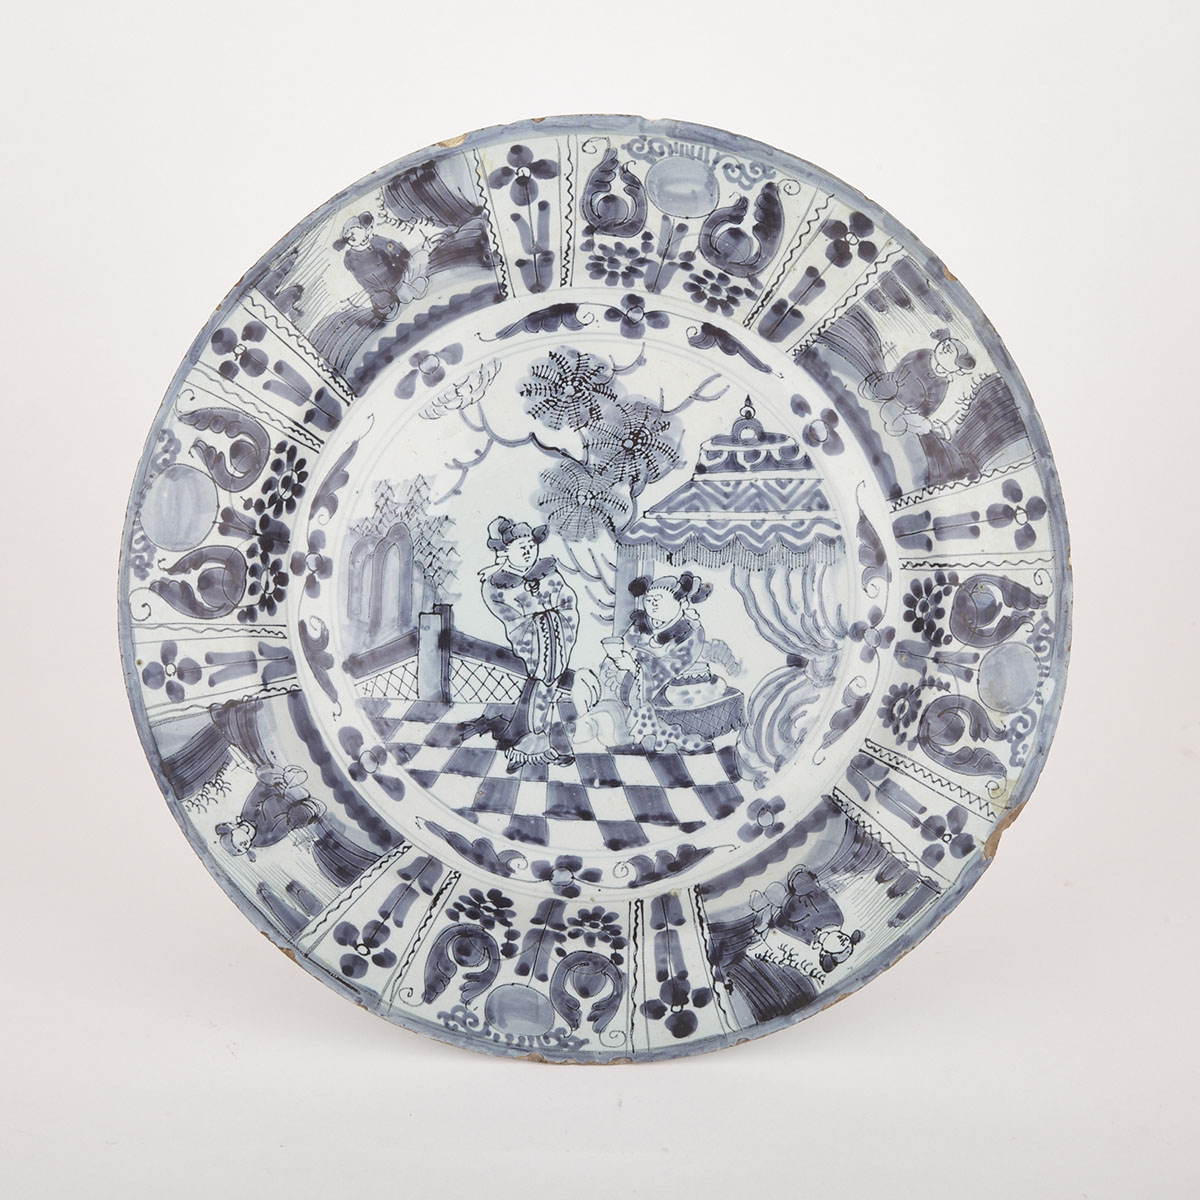 Delft Kraak-Style Charger, 18th century